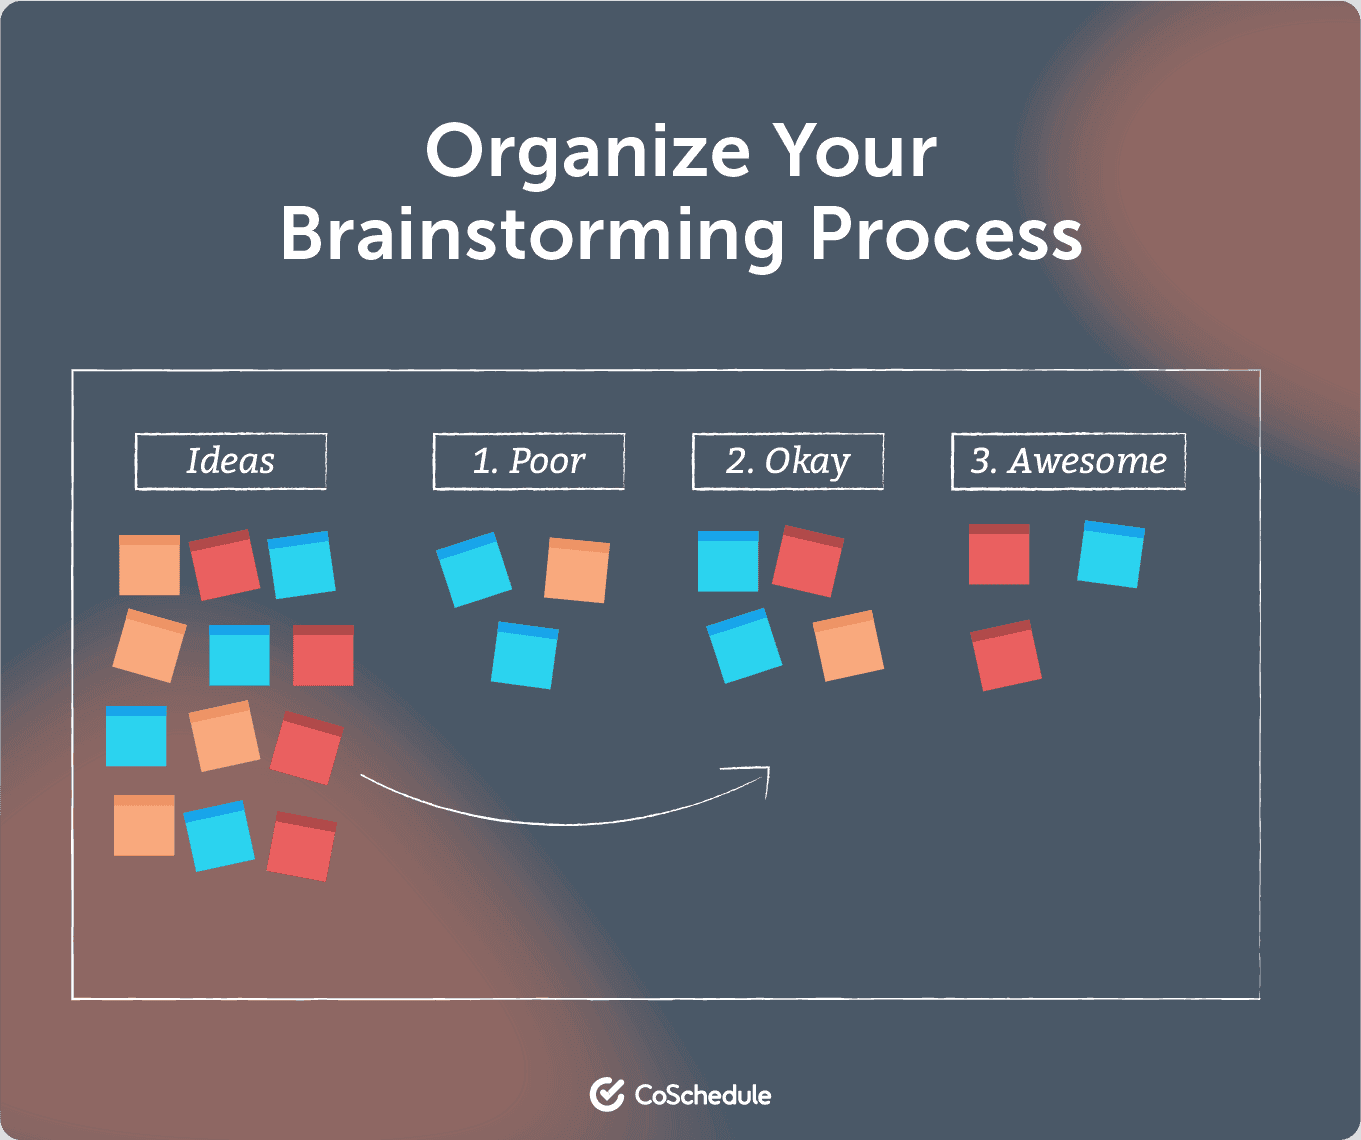 Organize your brainstorming process